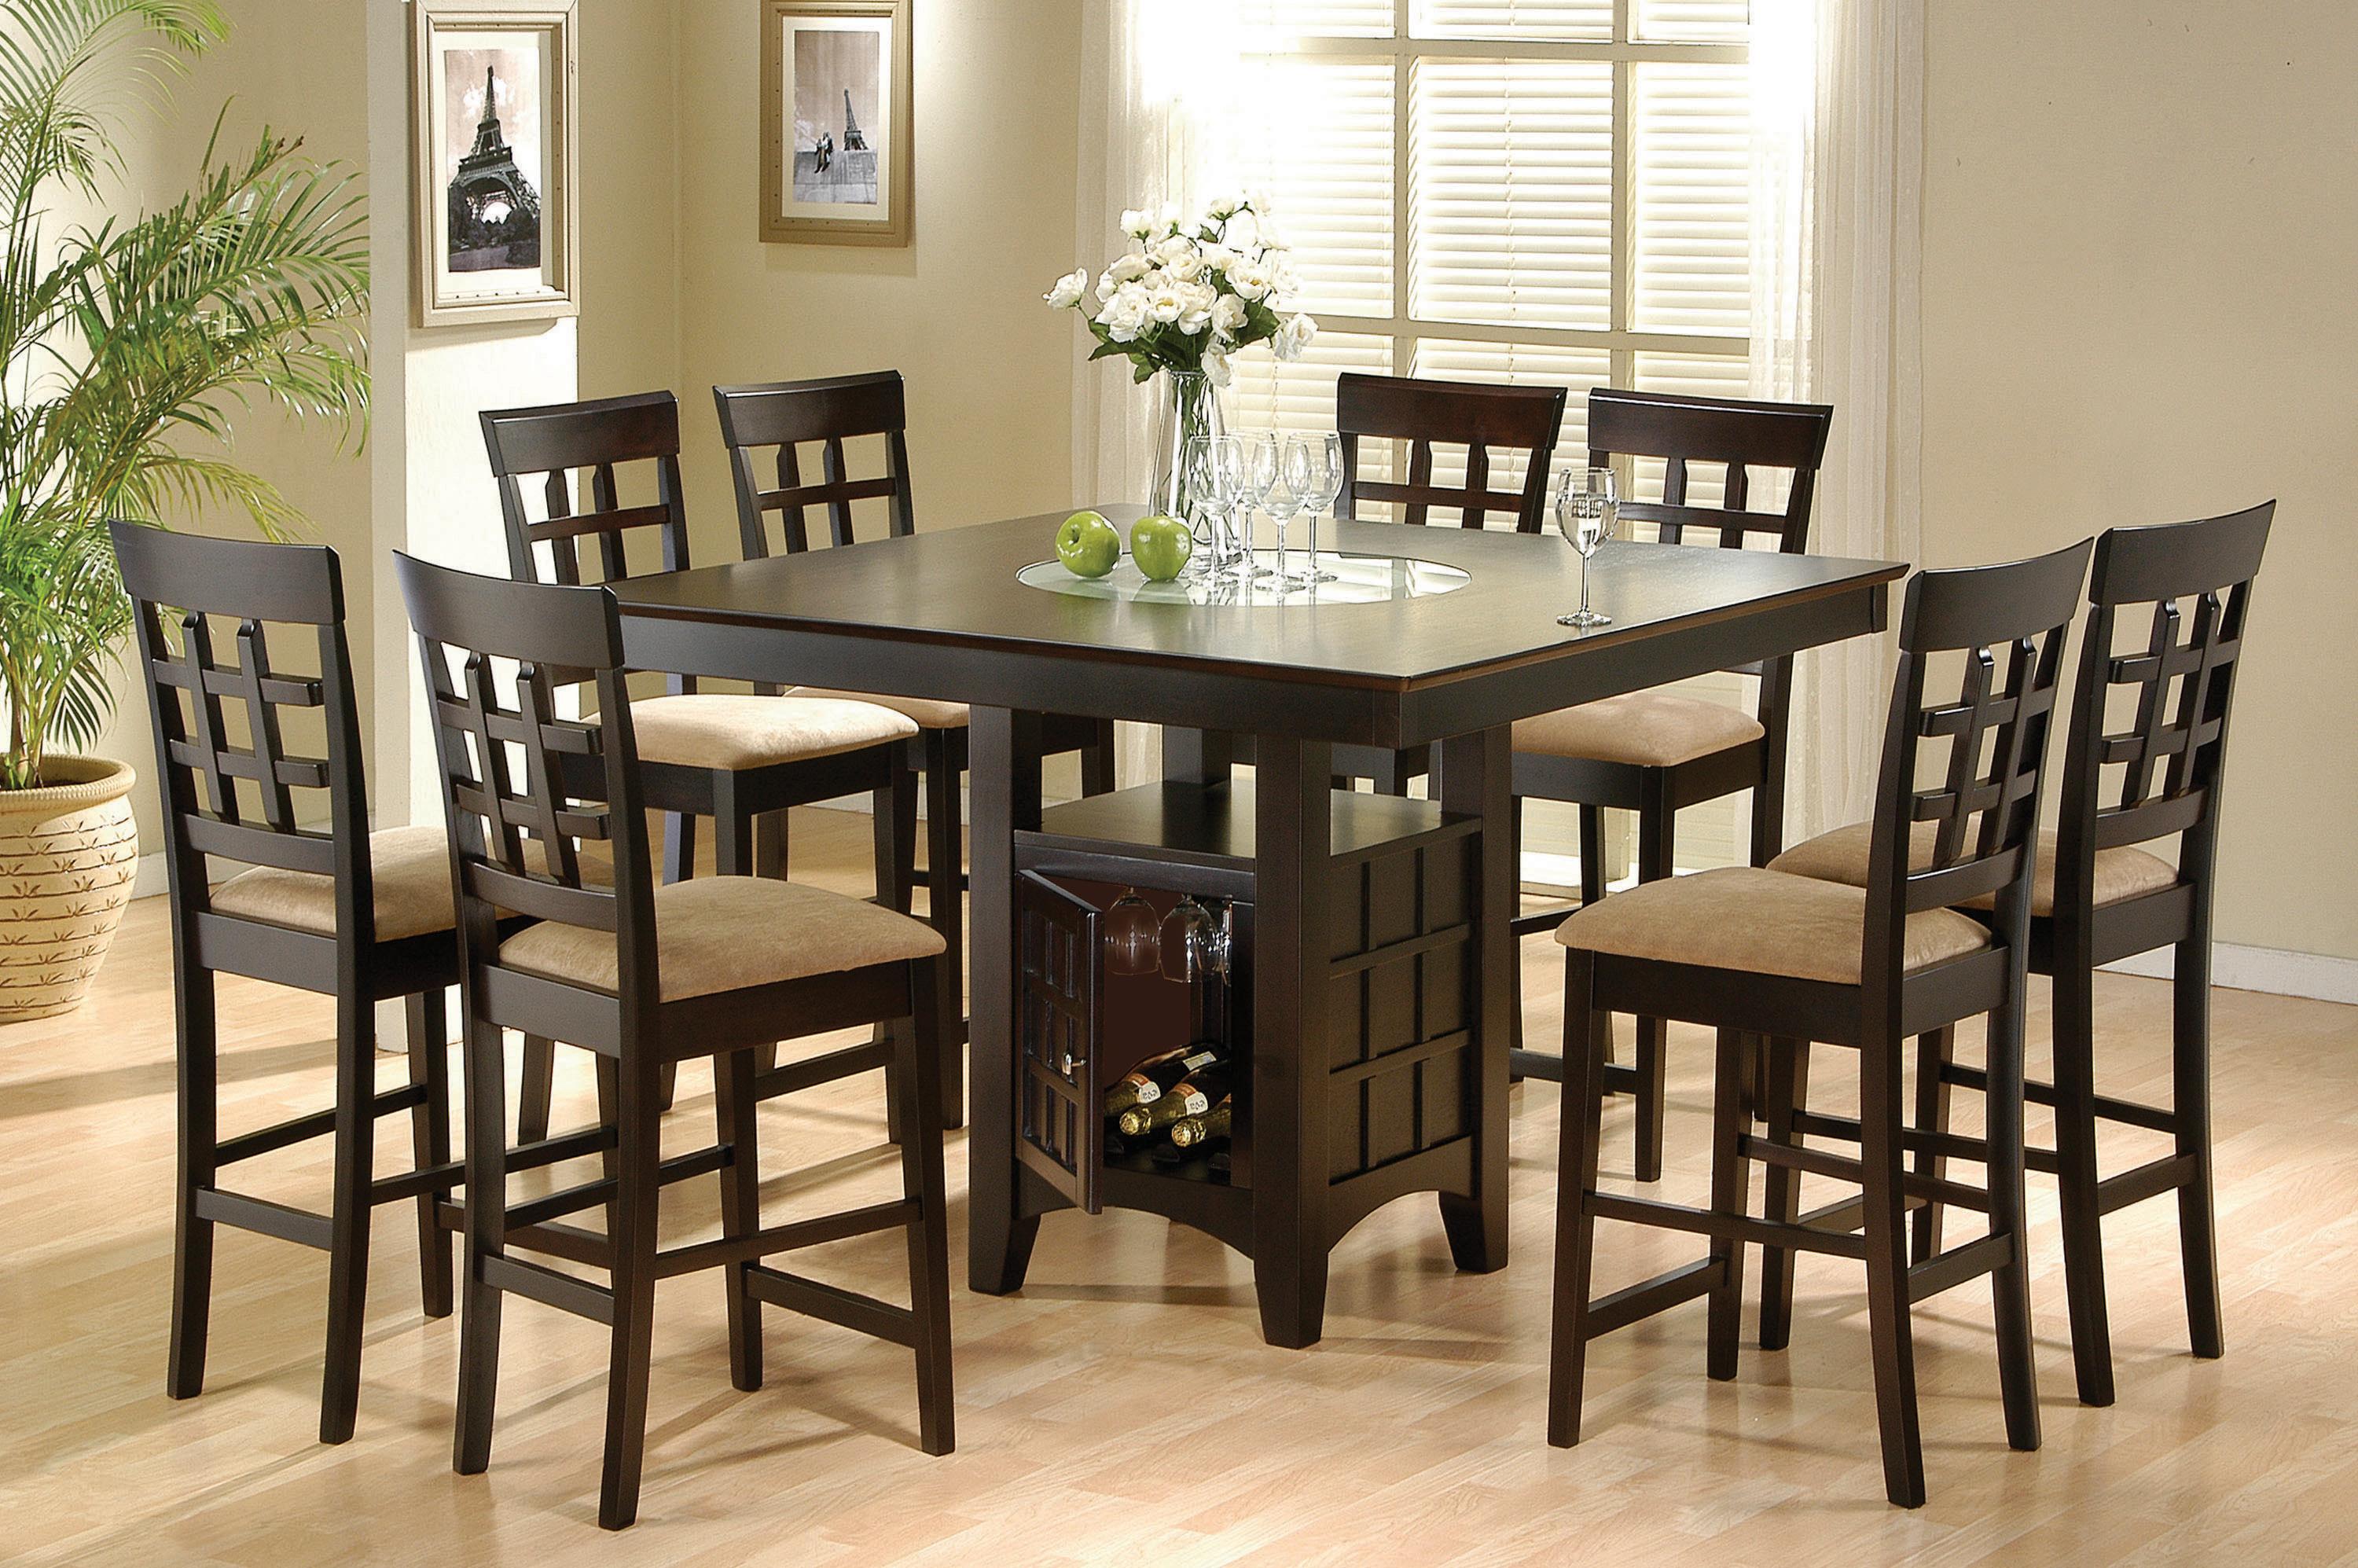 Transitional Dining Room Set 100438-S7 Clanton 100438-S7 in Cappuccino Fabric